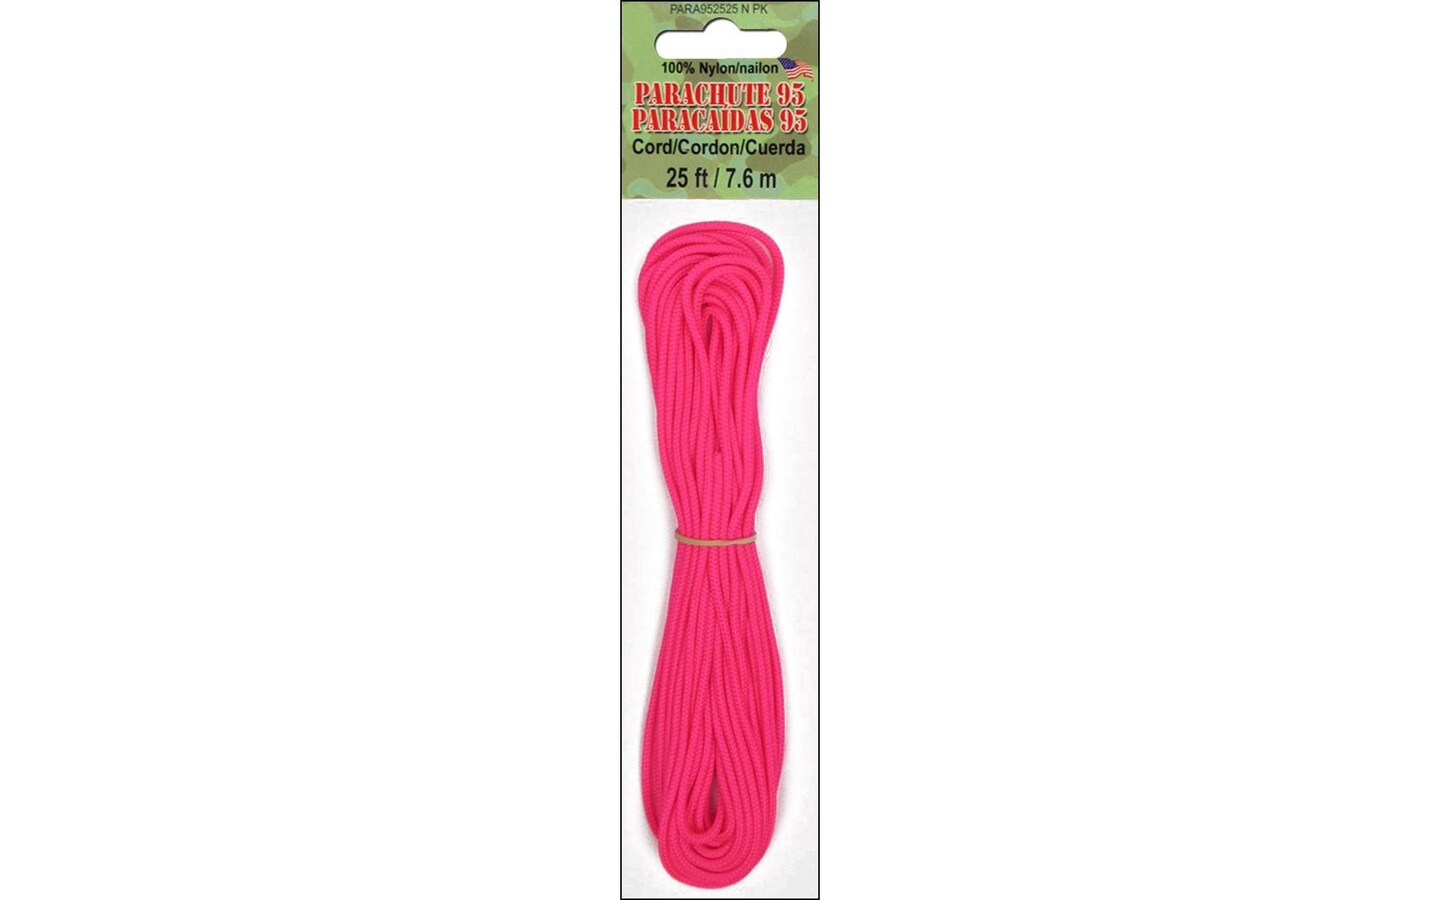 Pepperell Parachute Cord 95 Nylon 25ft Neon Pink